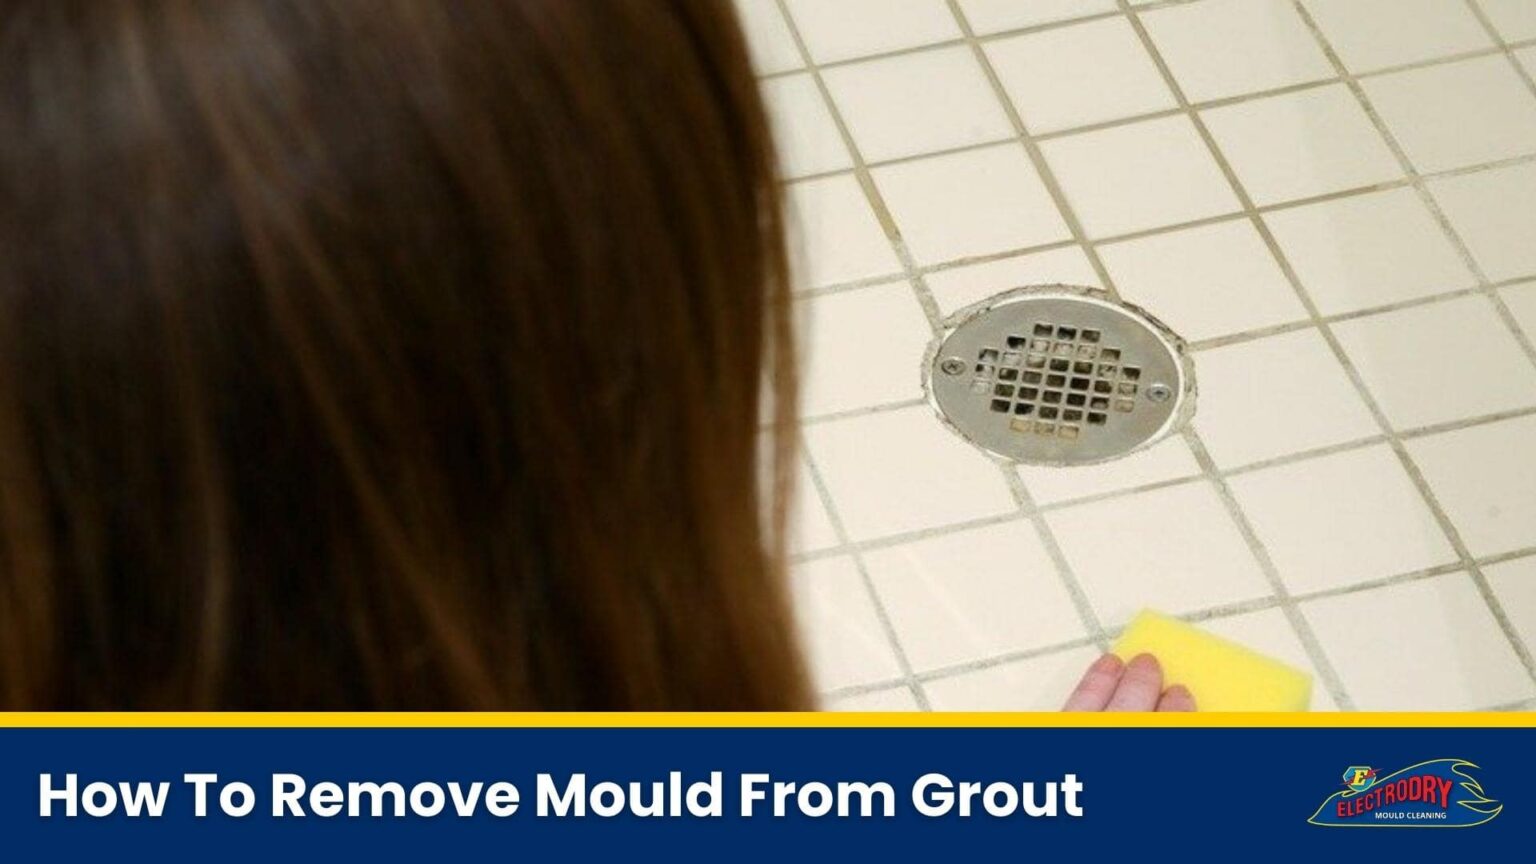 How To Remove Mould From Grout